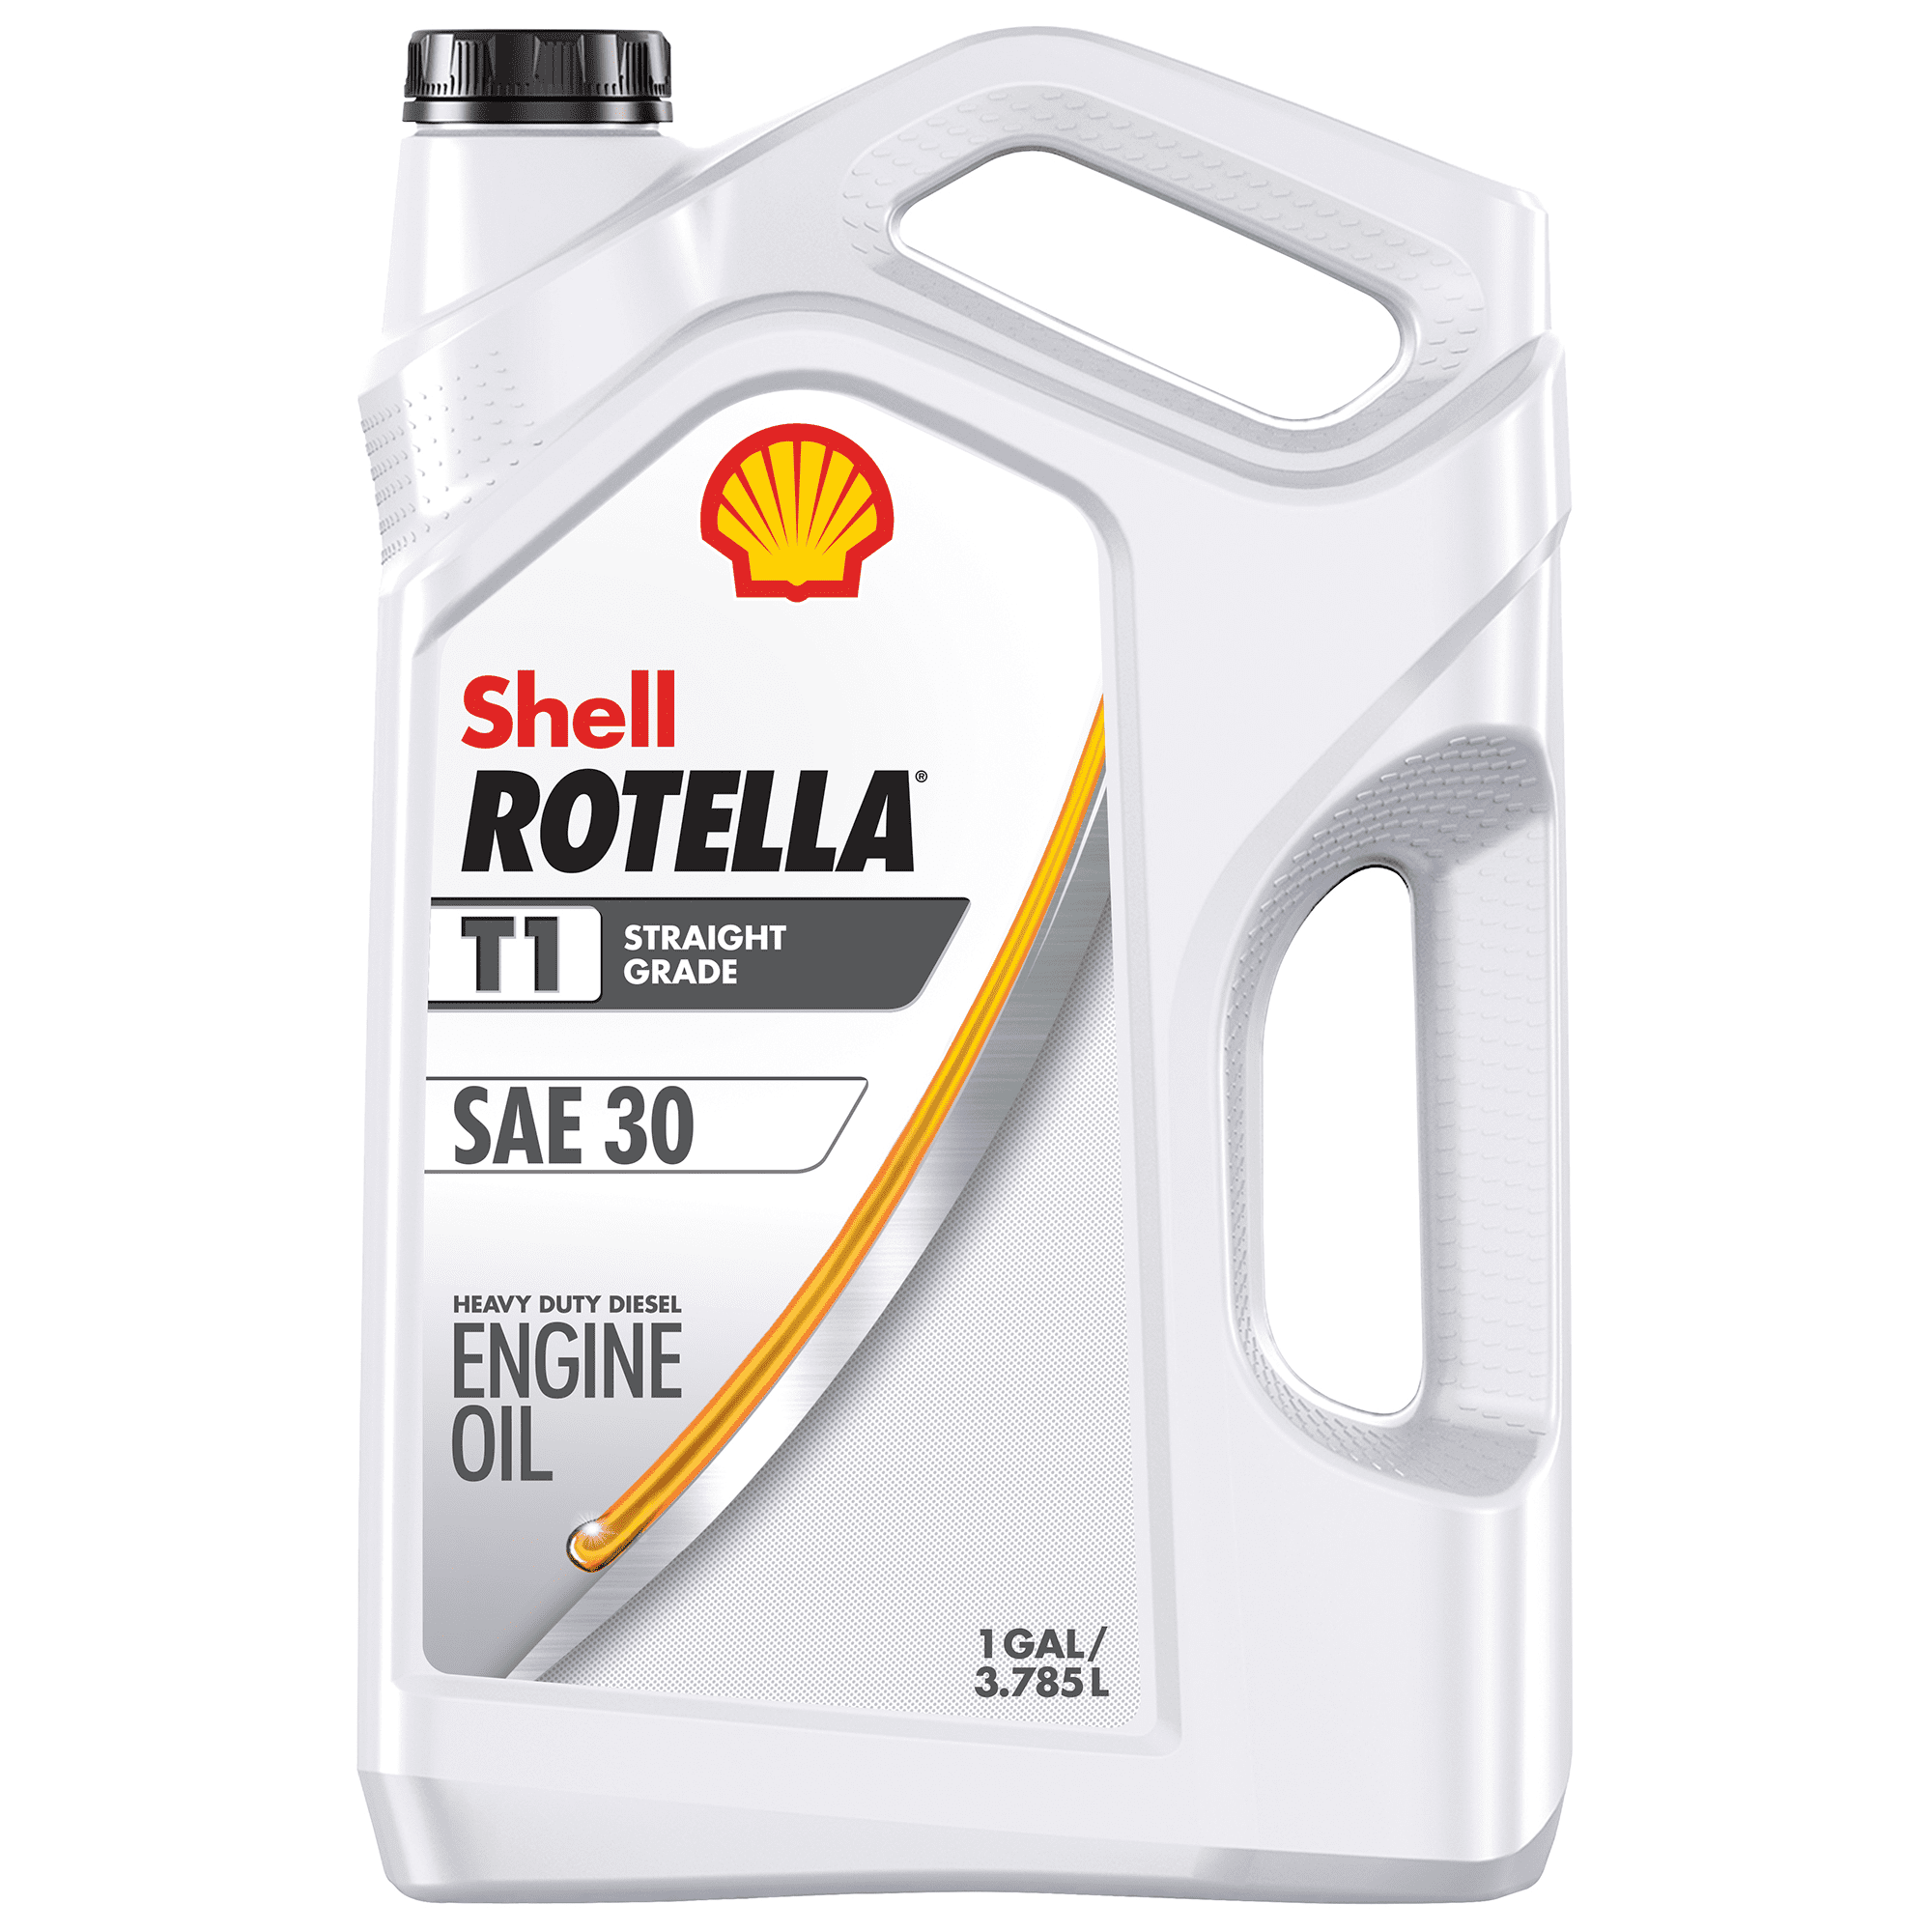 Is Rotella A Good Oil